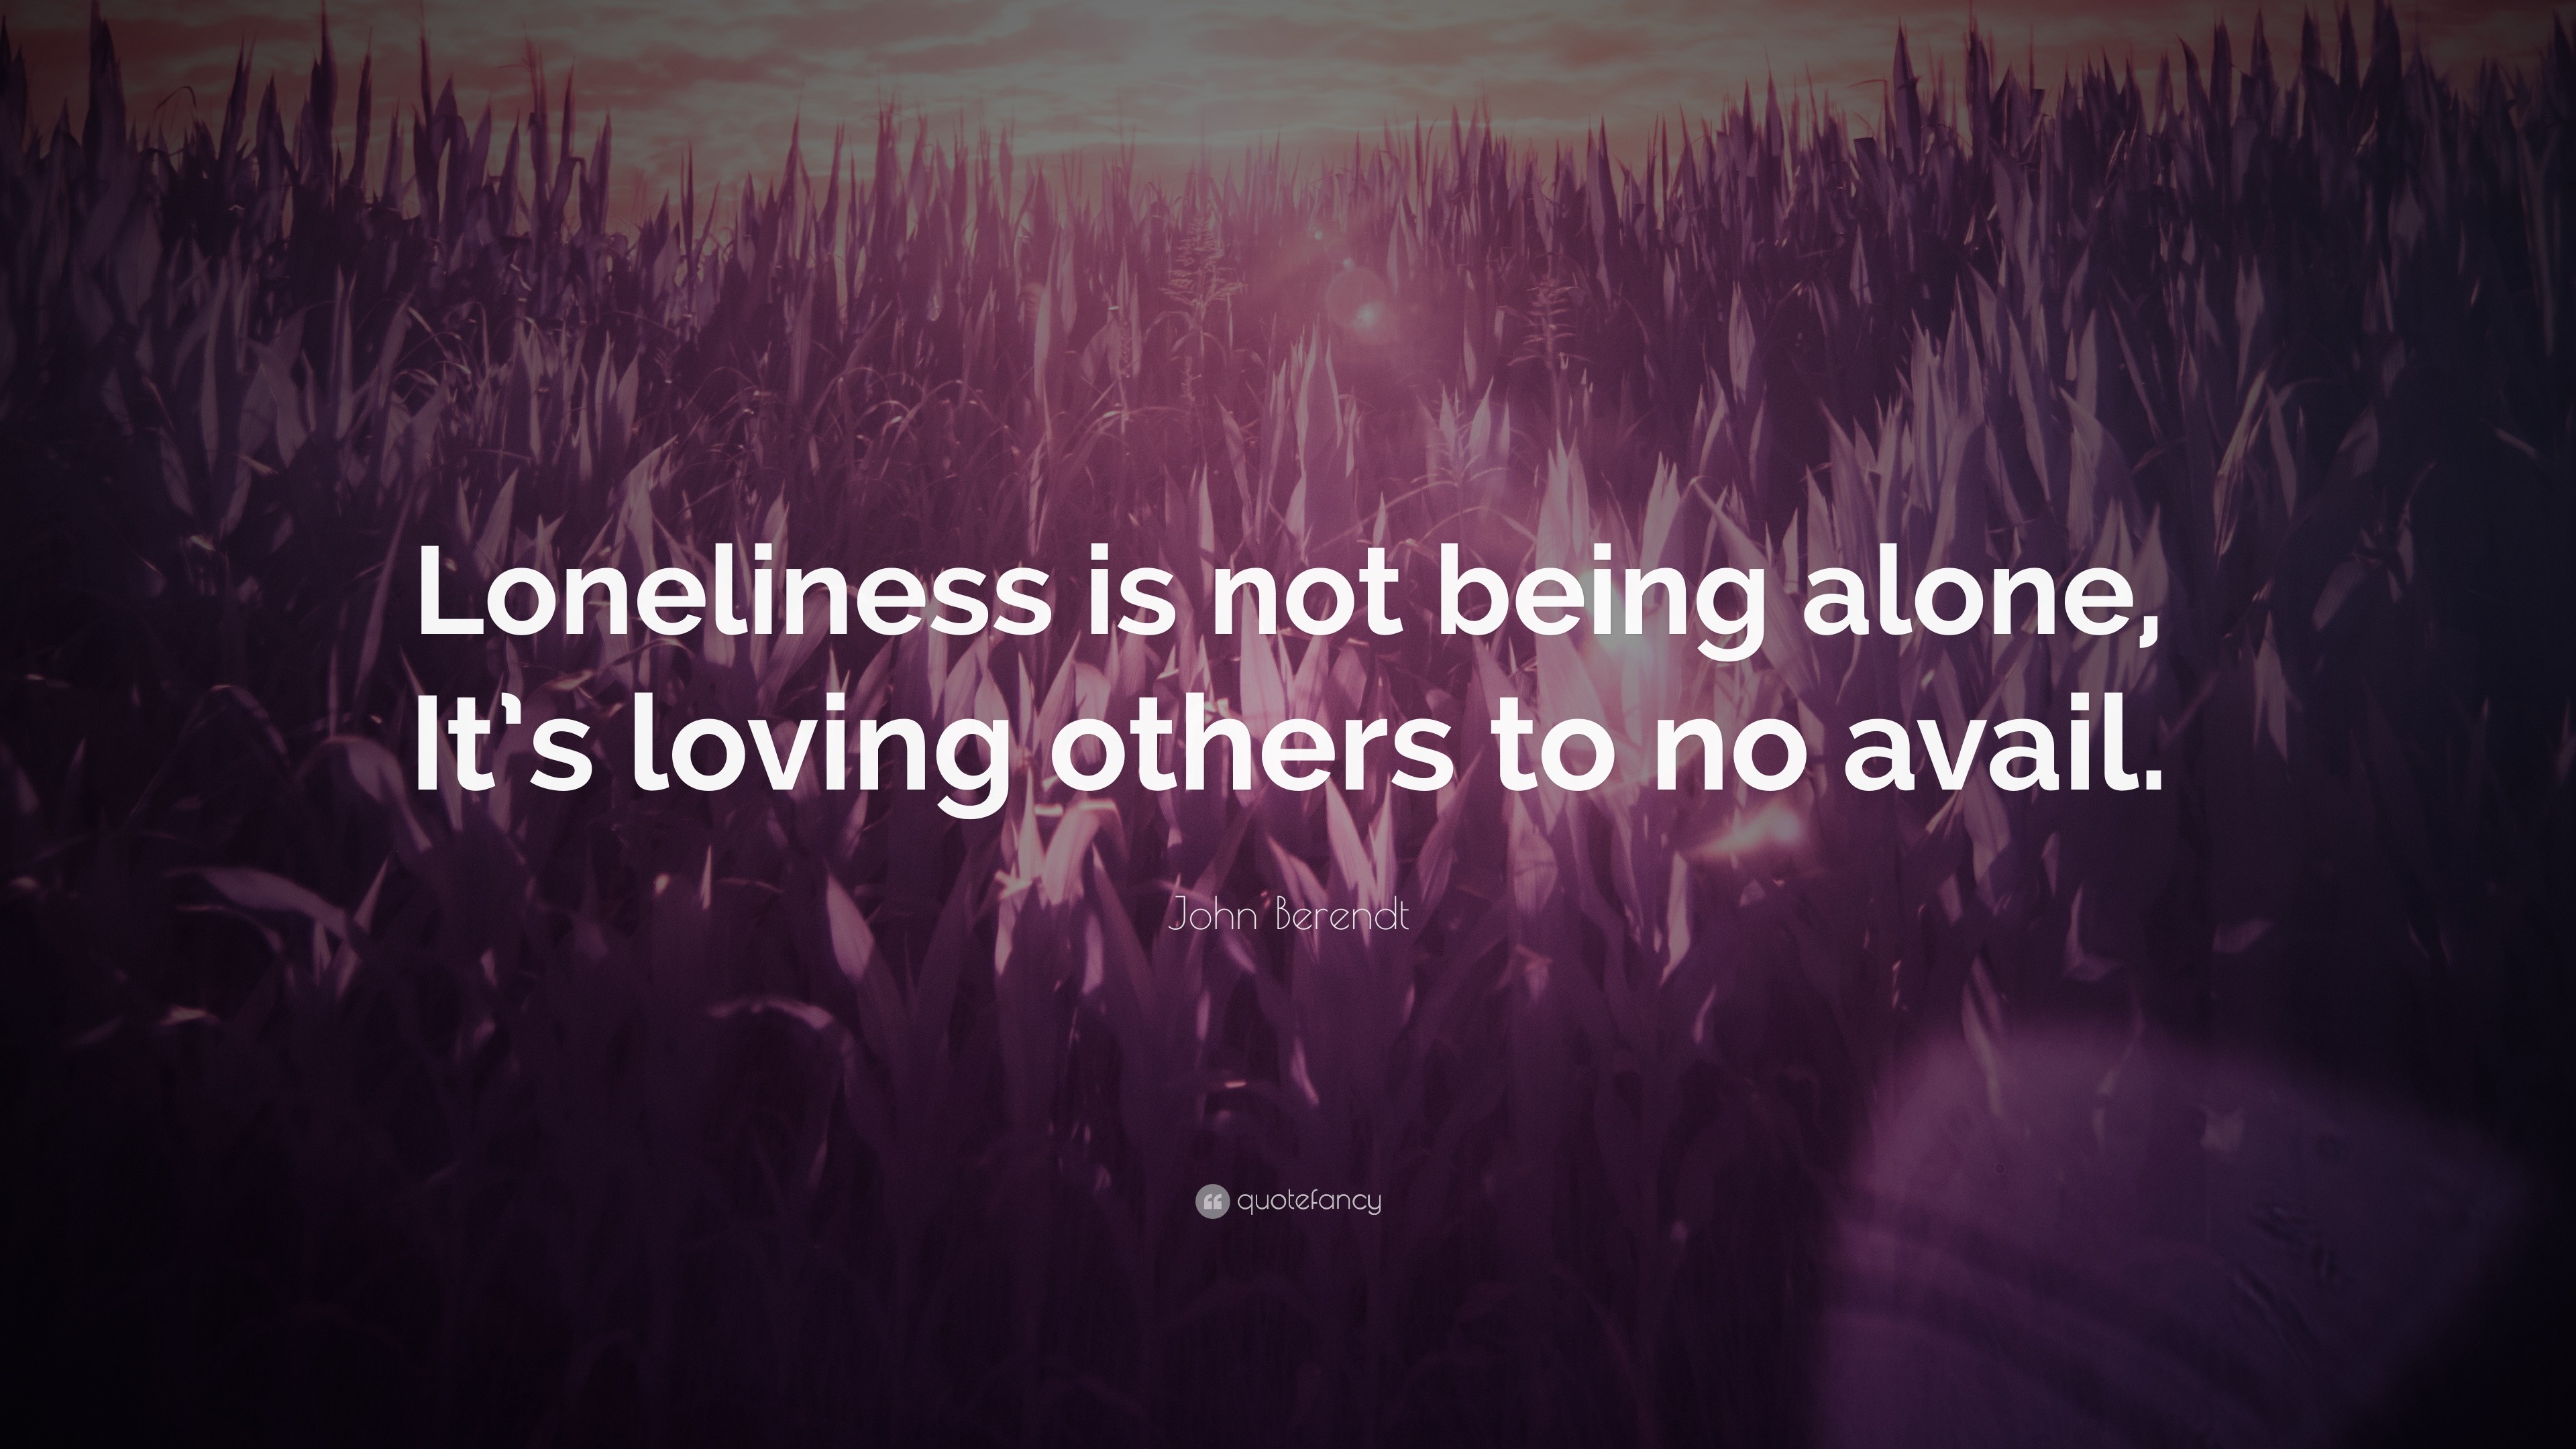 John Berendt Quote: “Loneliness is not being alone, It’s loving others ...